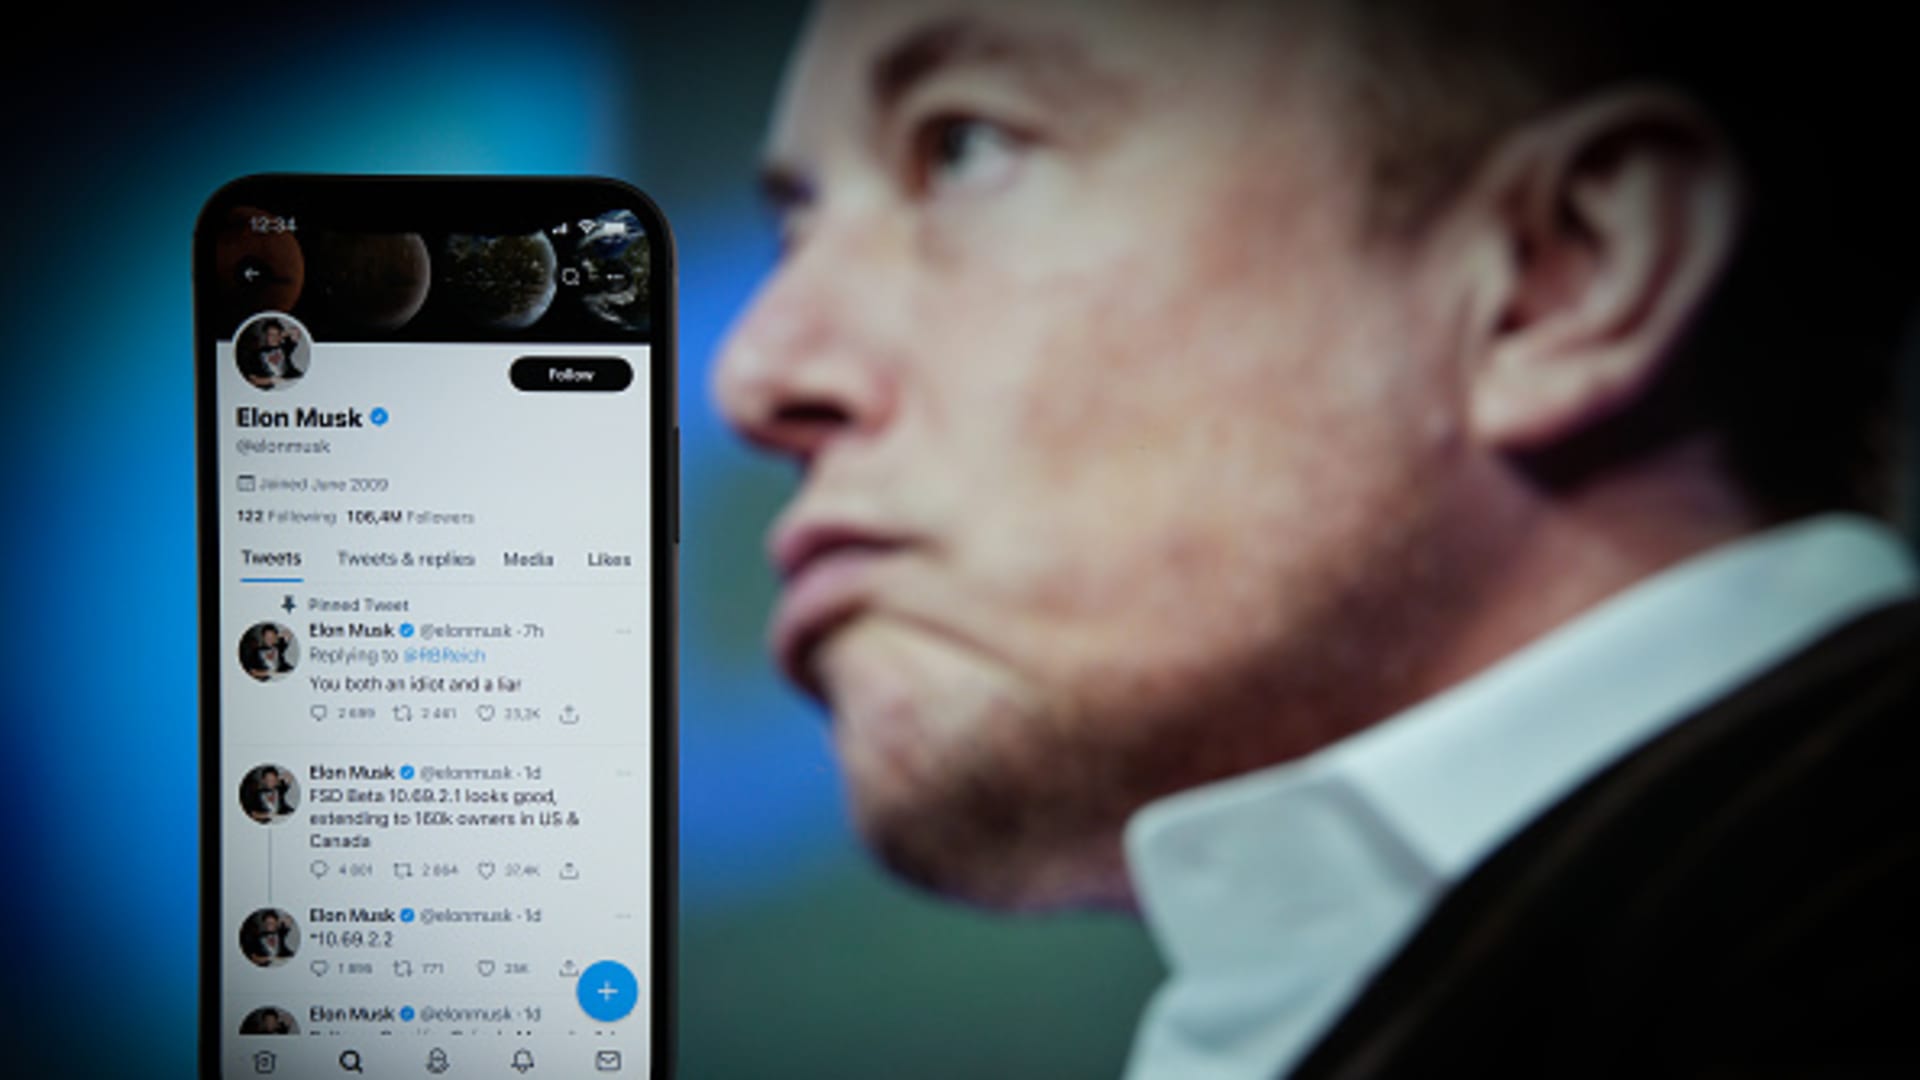 Musk seeks to stop Oct. 17 trial to close Twitter deal on agreed terms